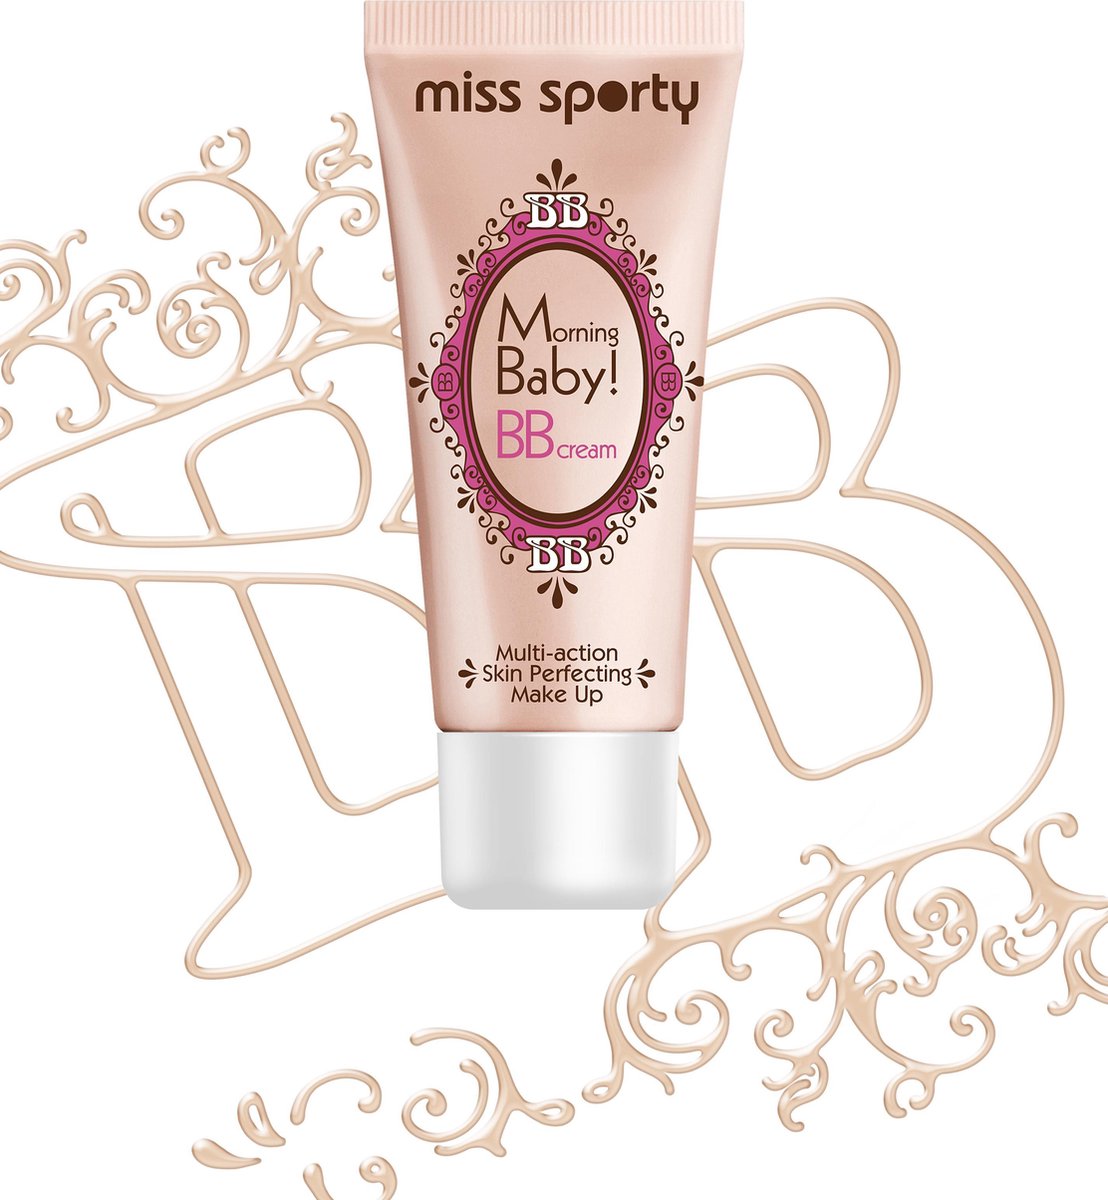 Miss Sporty Morning Baby BB Cream - 001 Nude Radiance - Foundation